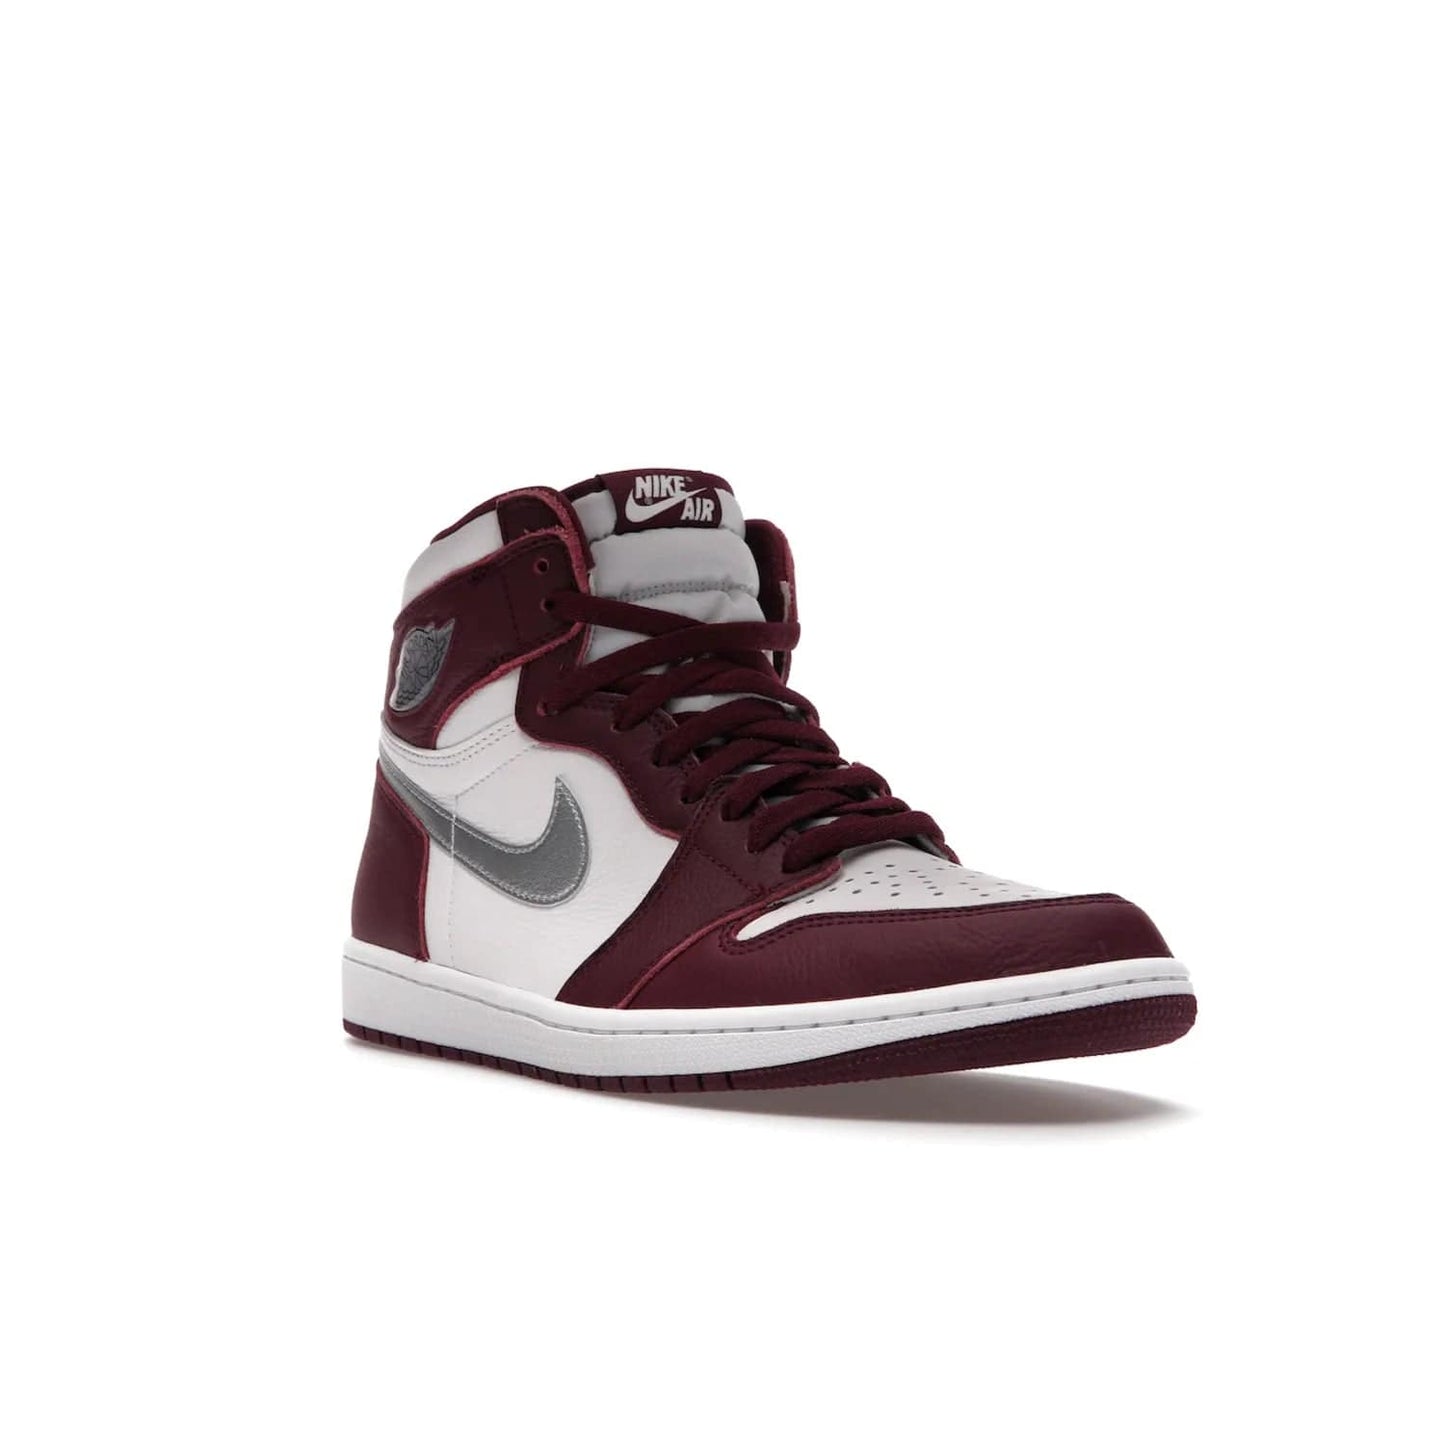 Jordan 1 Retro High OG Bordeaux - Image 6 - Only at www.BallersClubKickz.com - Shop the classic Air Jordan 1 High Bordeaux with a modern high-top cut. The timeless Bordeaux and White-Metallic Silver colorway, releasing Nov 20, 2021, is perfect for practice or a night out.